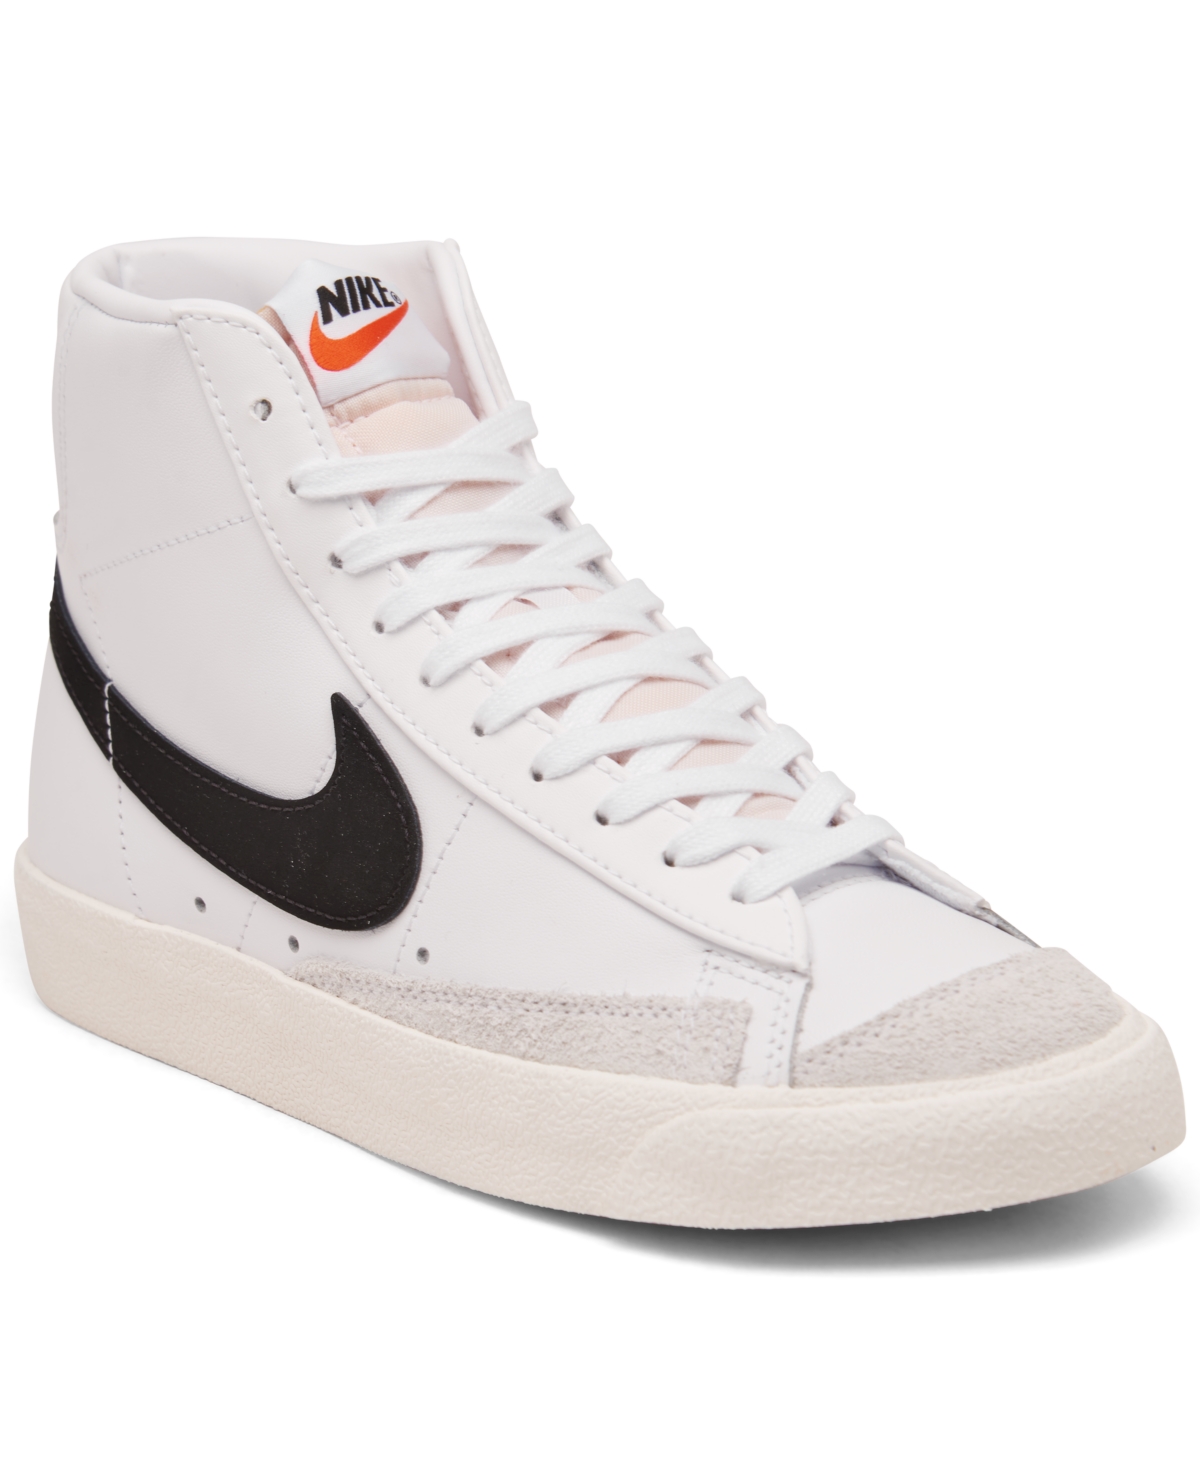 Women's Blazer Mid 77's High Top Casual Sneakers from Finish Line - White, Black